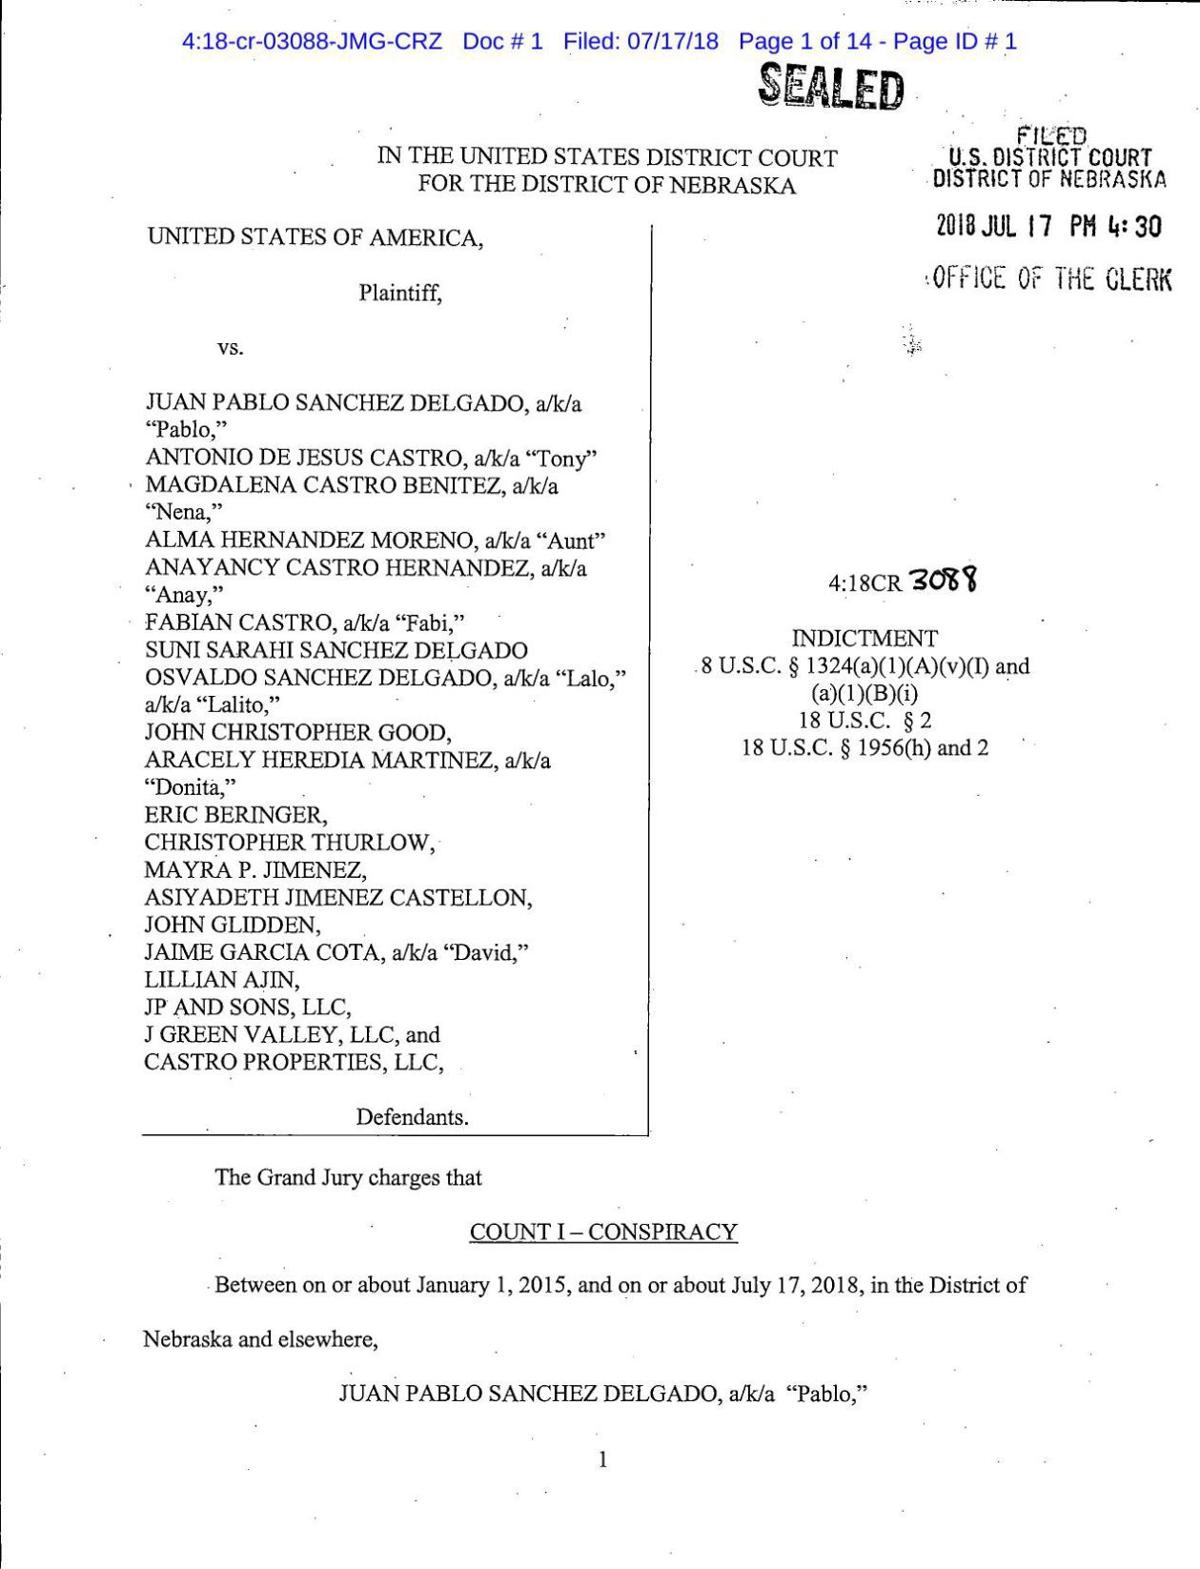 Read the federal court indictment   omaha.com